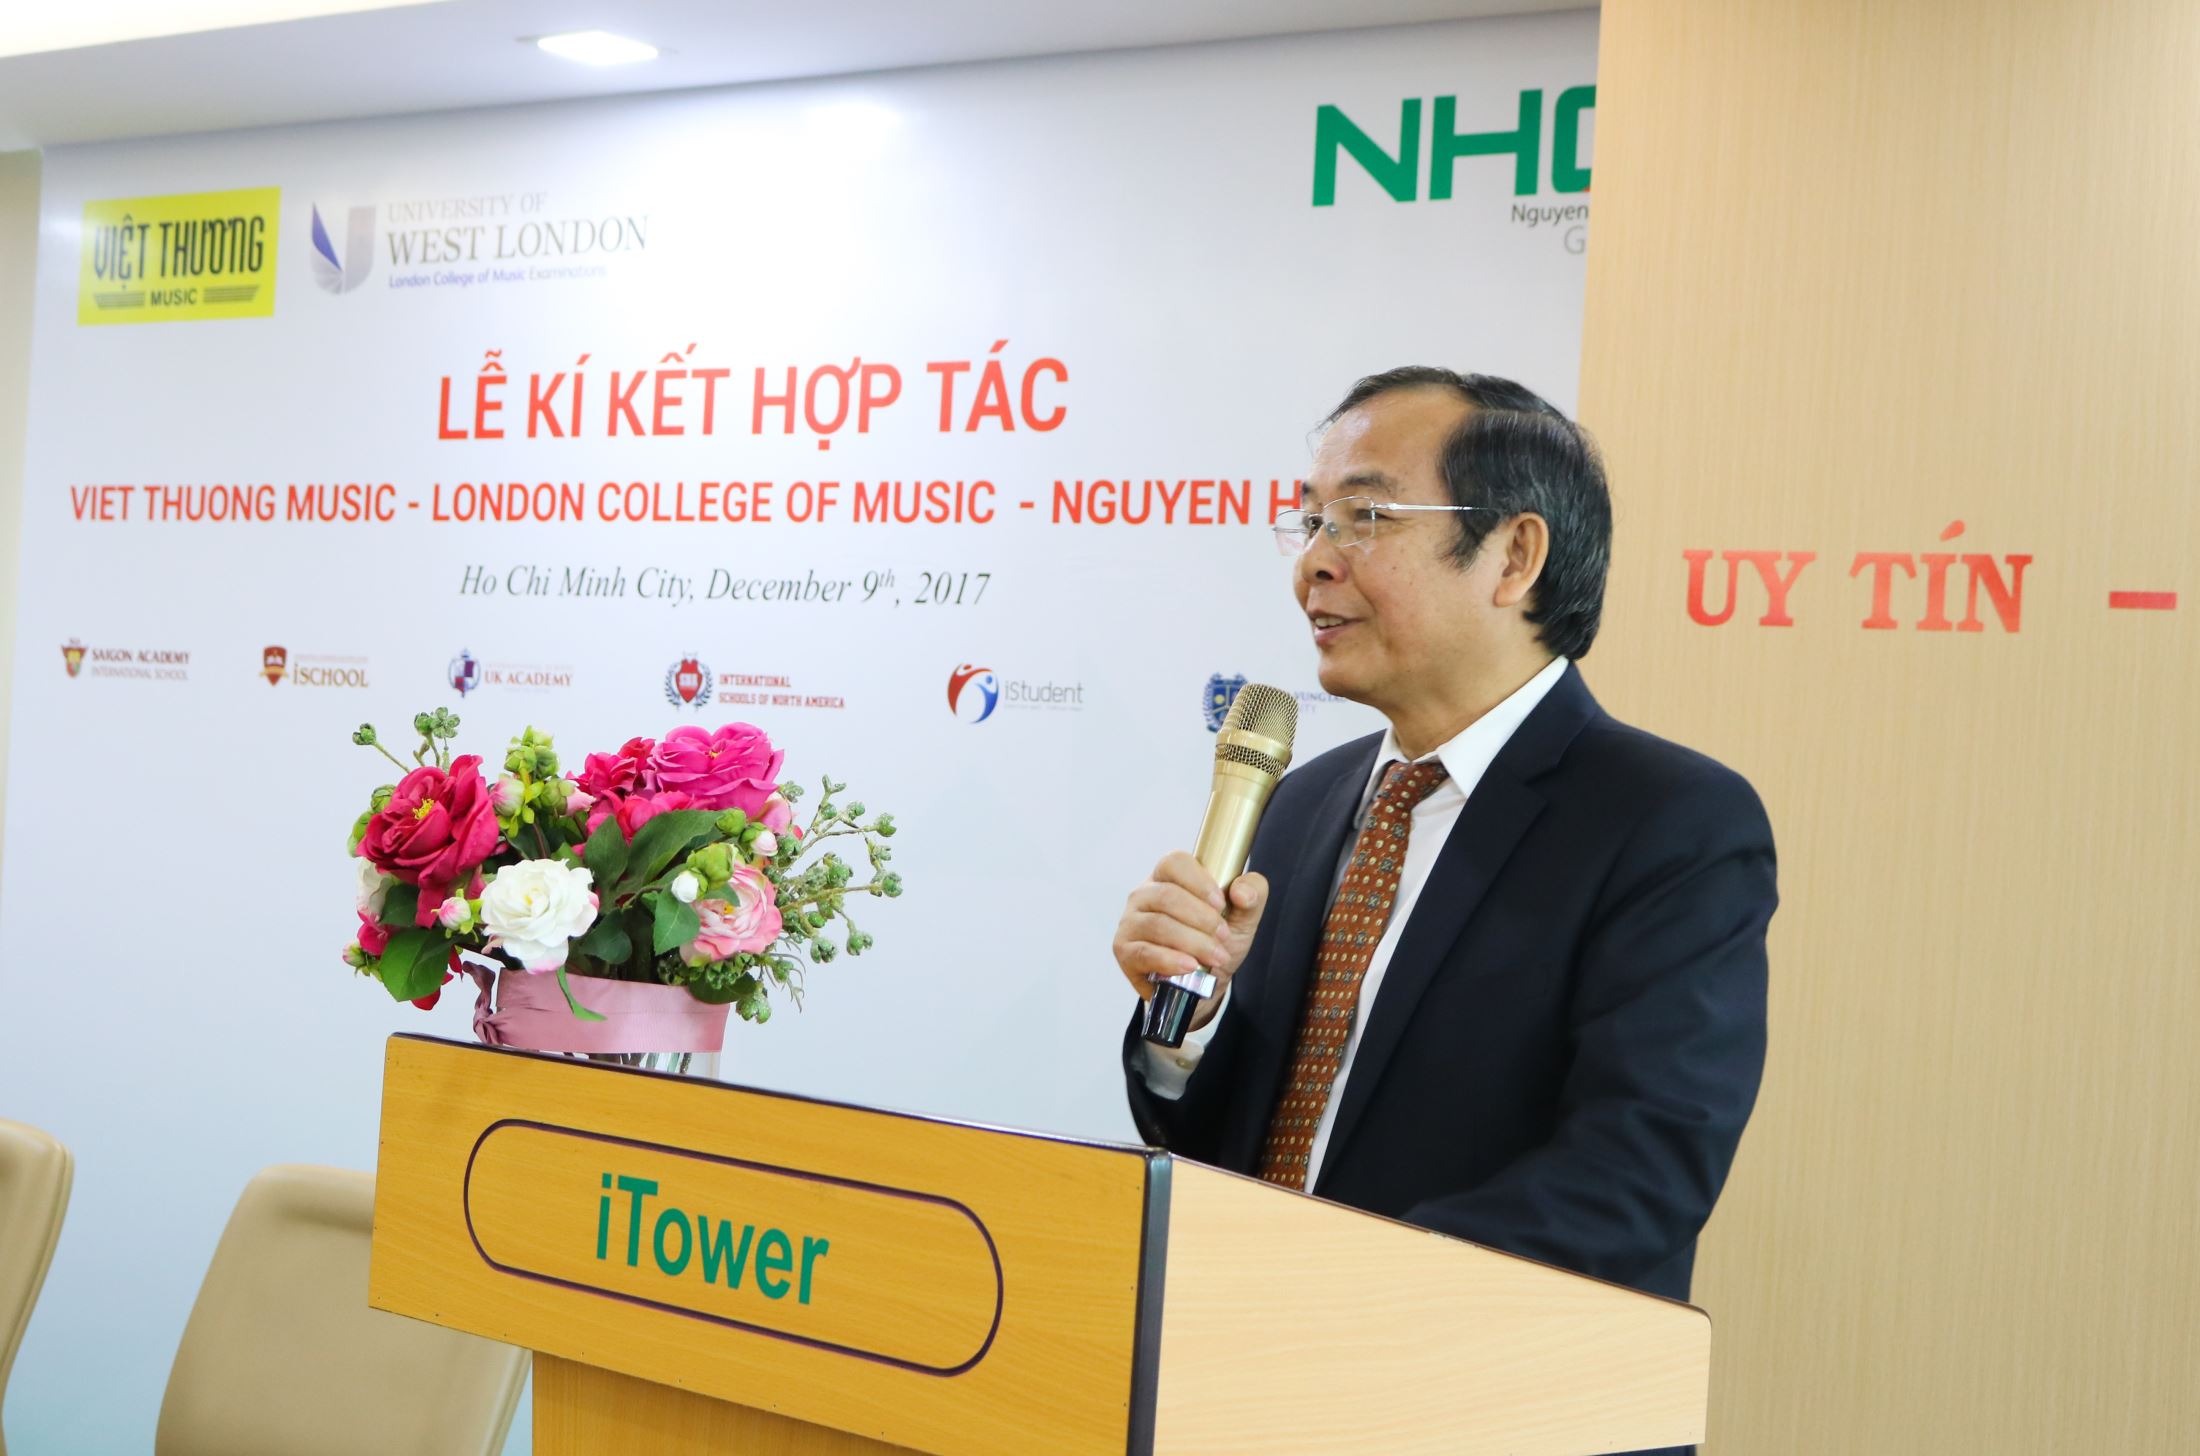 "Only love and clean conscience can bring people happiness. Music is the fruit of love. NHG not only wants to equip our students with knowledge but also to nurture them a beautiful soul. Music is an important element of the Group's philosophy of education." said Dr. Do Manh Cuong, Permanent Member of NHG’s Education Council cum NHG’s Academic Director.